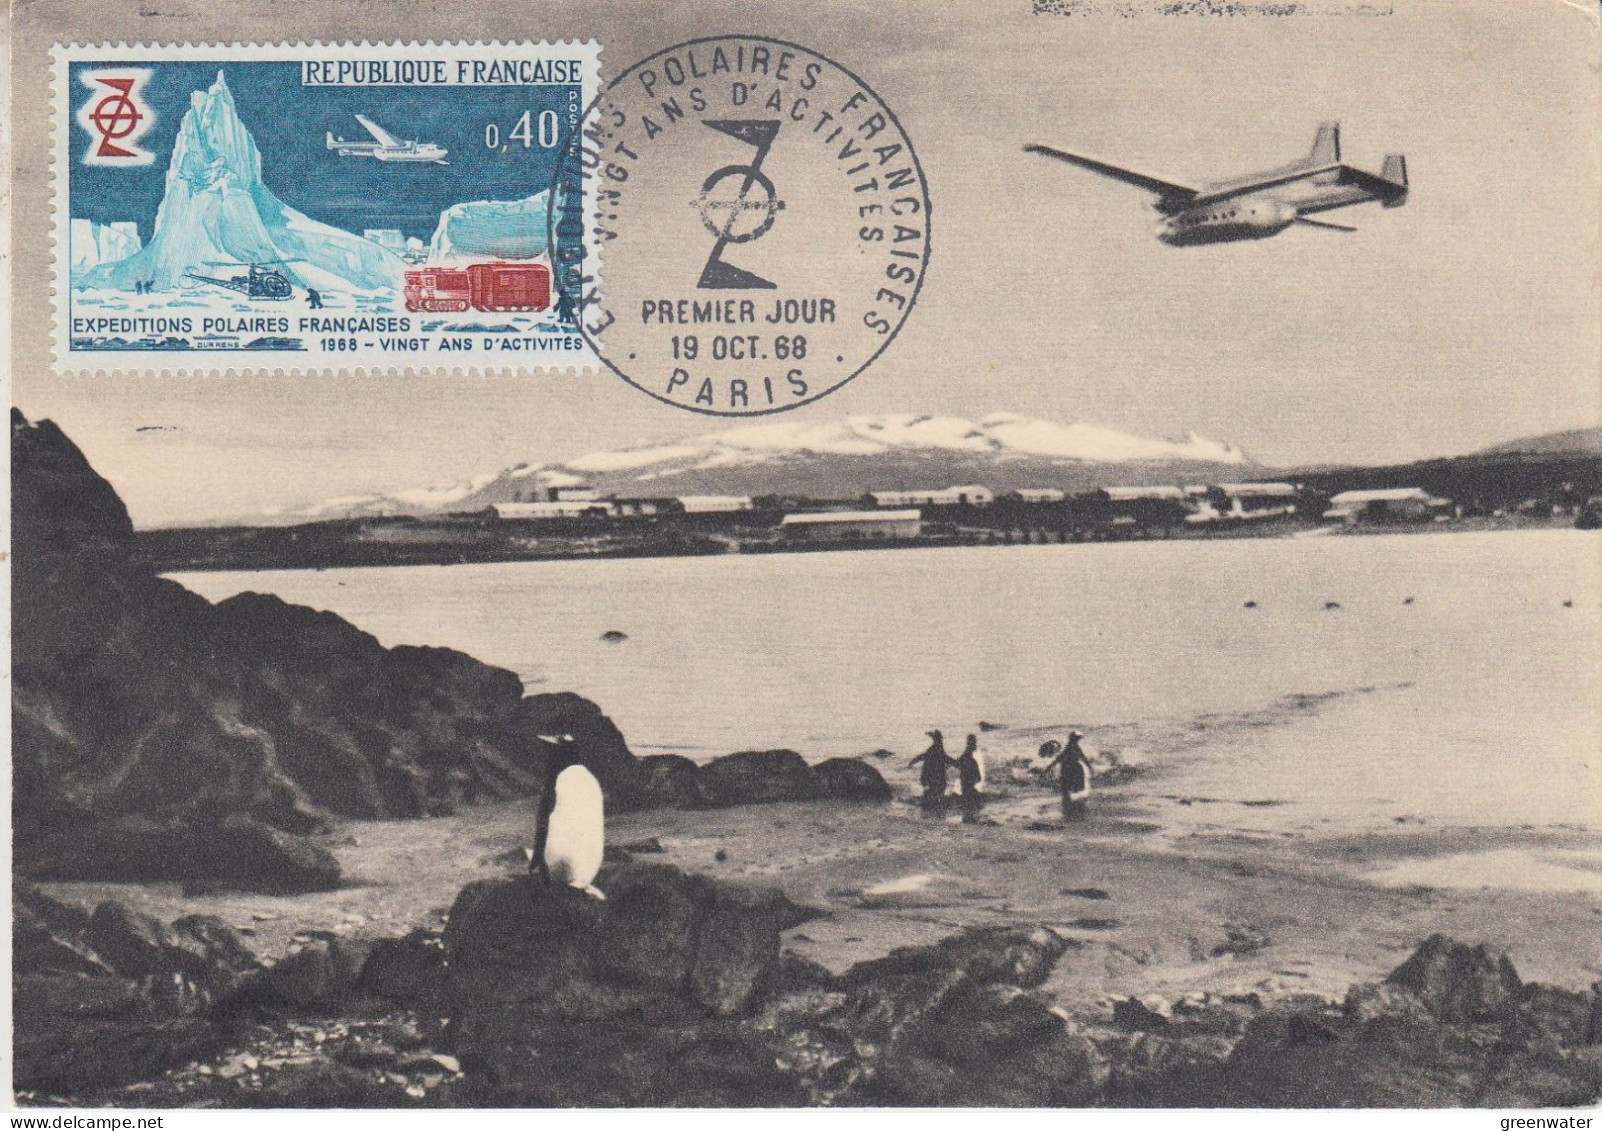 France Expeditions Polaires Francaises Maxicard 1969 (ZO192) - Antarctische Expedities